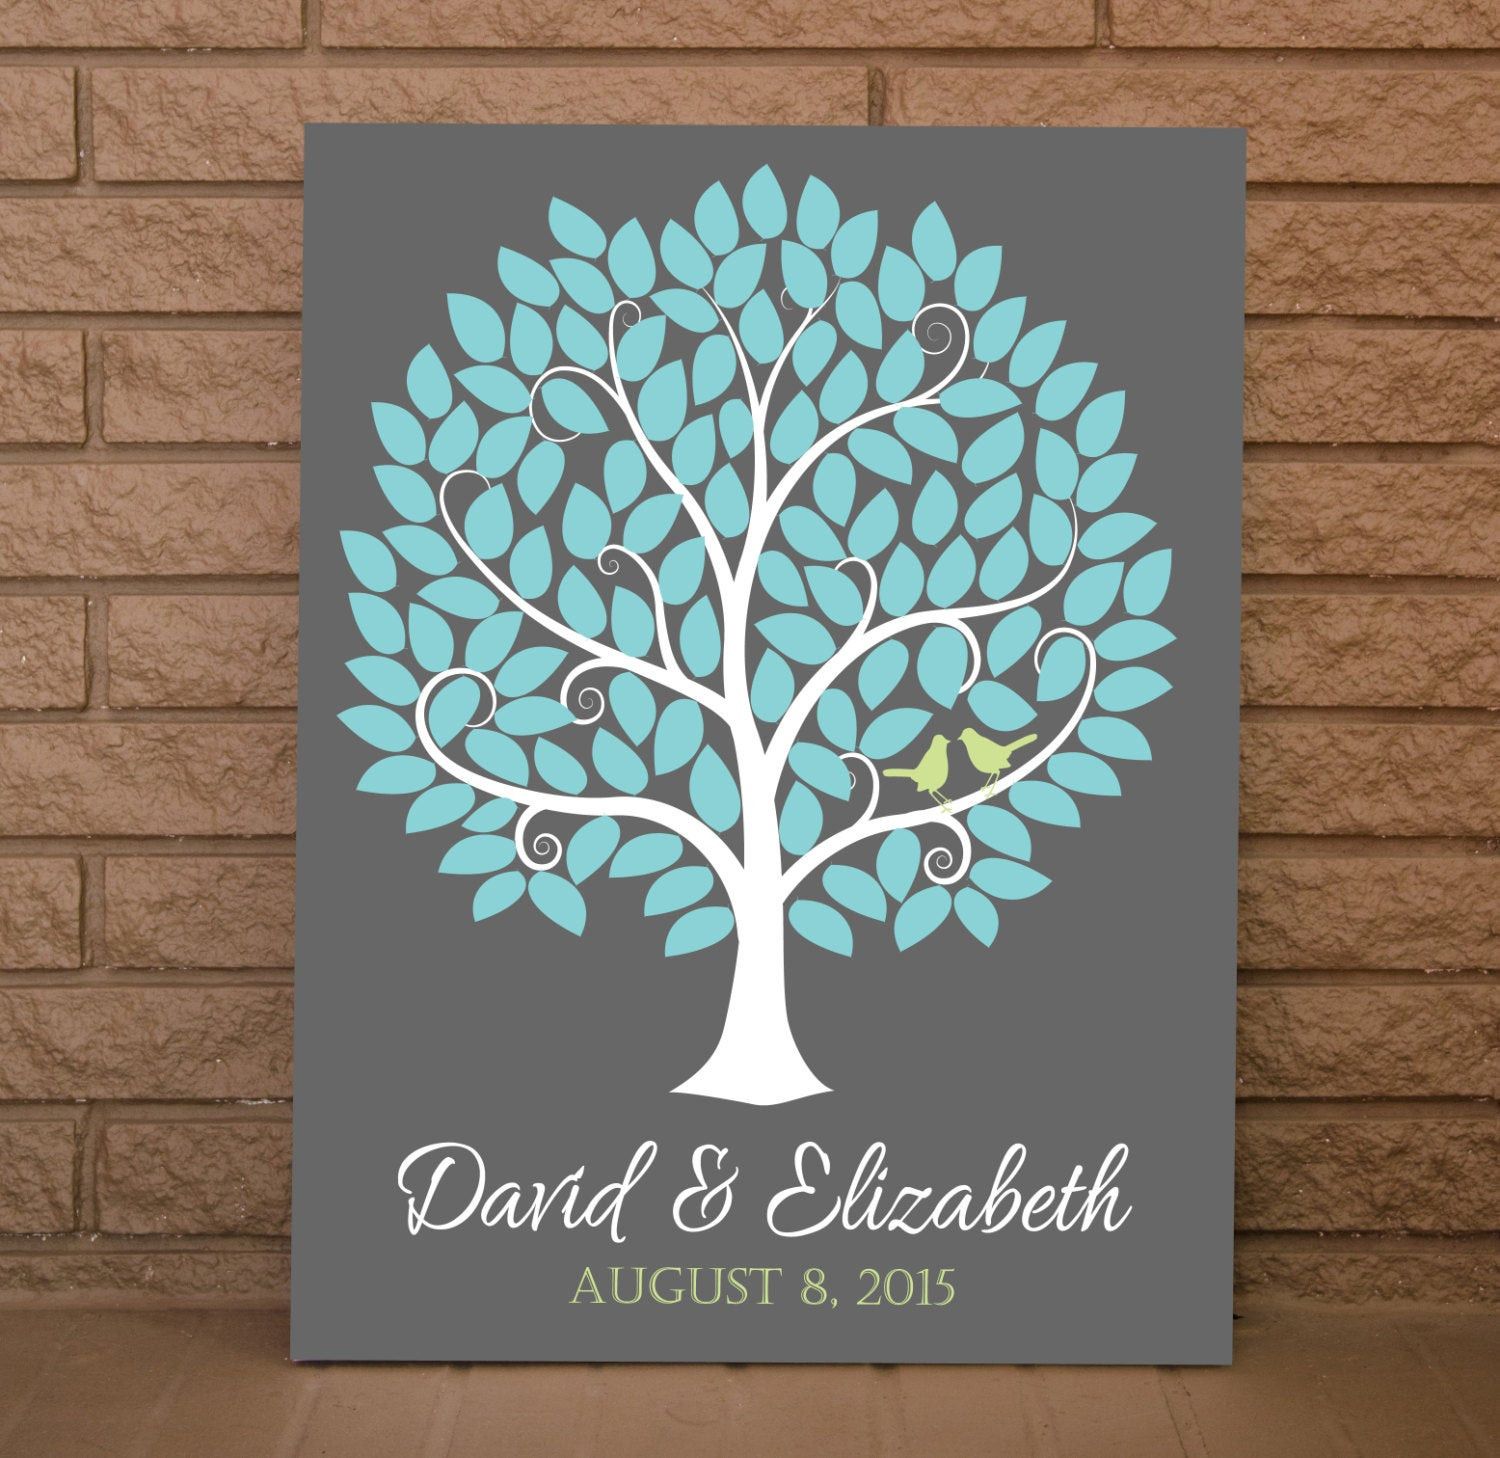 Tree For Wedding Guest Book
 Wedding Guest Tree Wedding Sign Book Wedding Guestbook